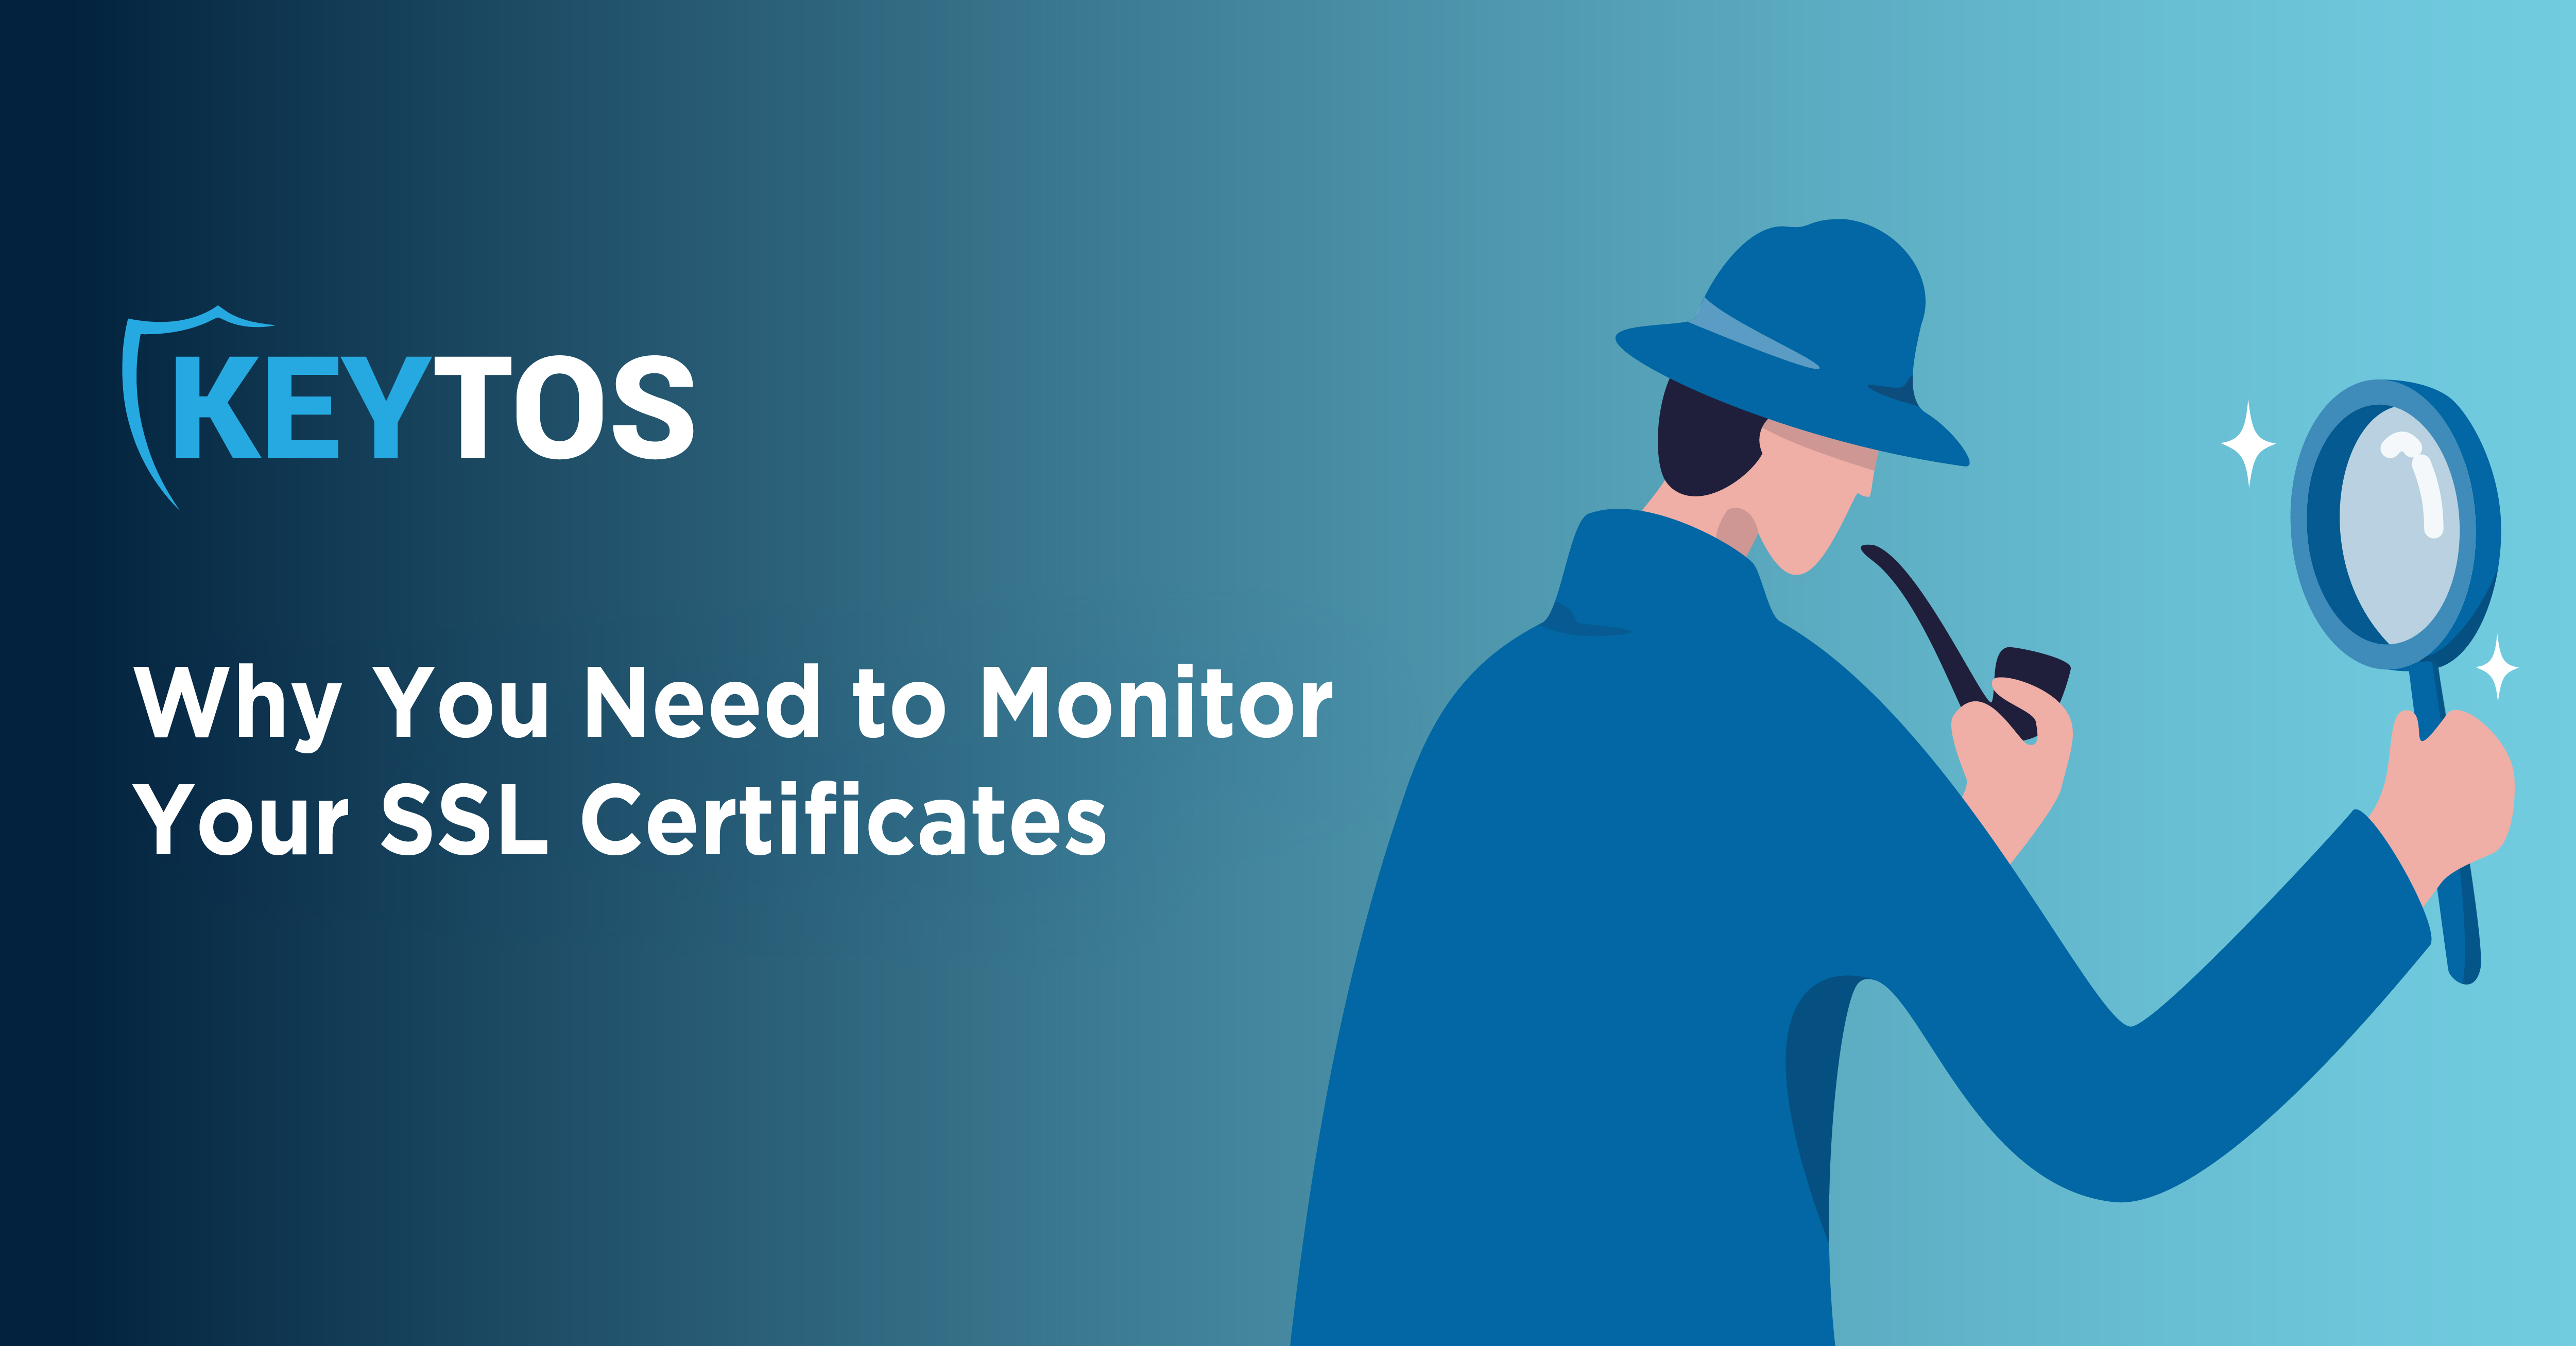 What is SSL Certificate Monitoring? Why is it Important?